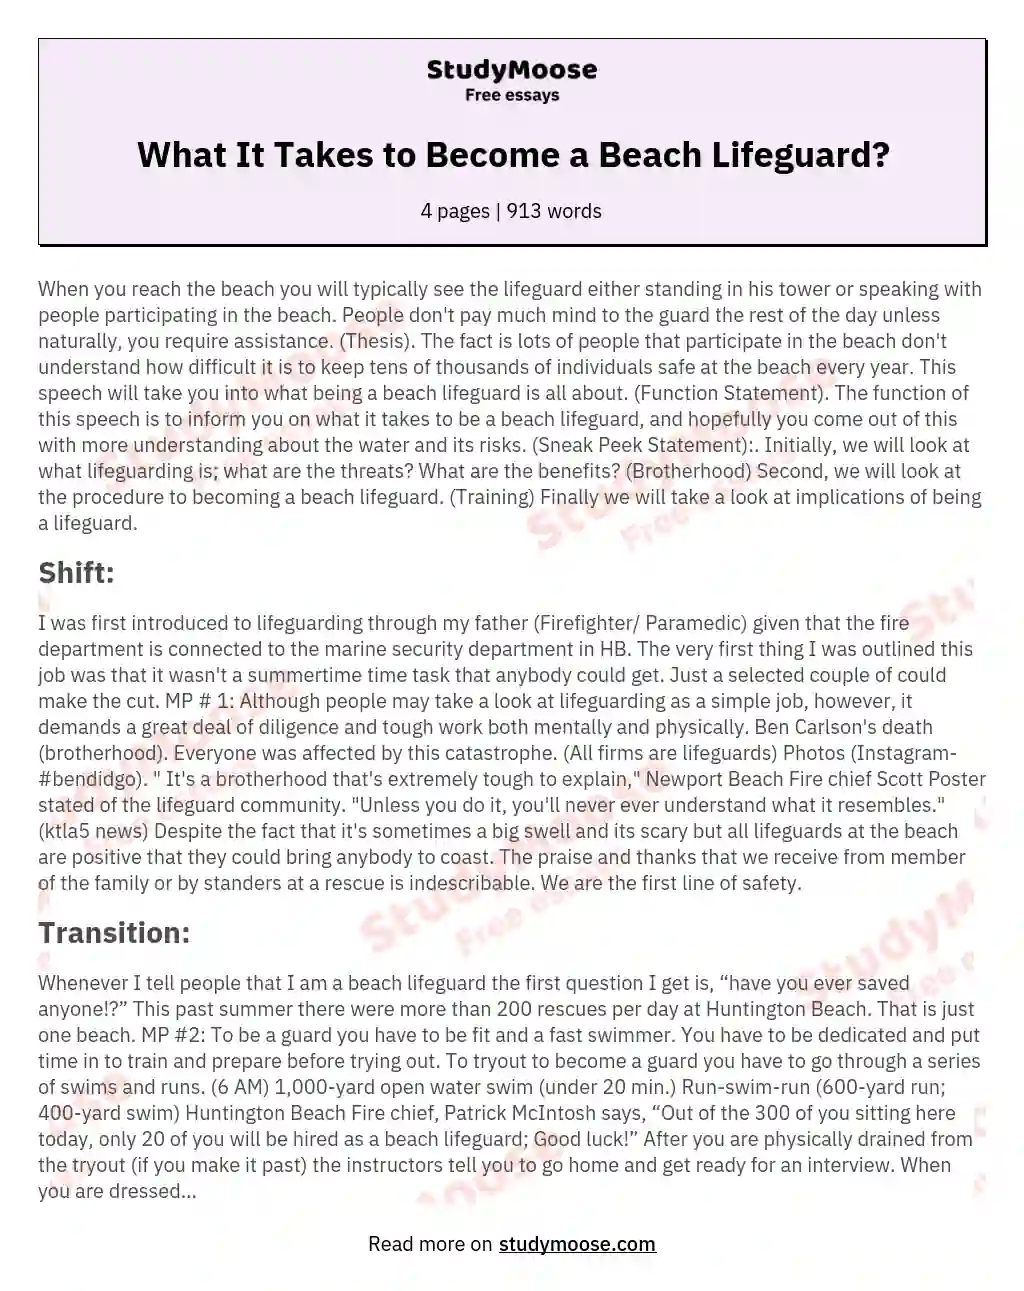 What It Takes to Become a Beach Lifeguard? essay